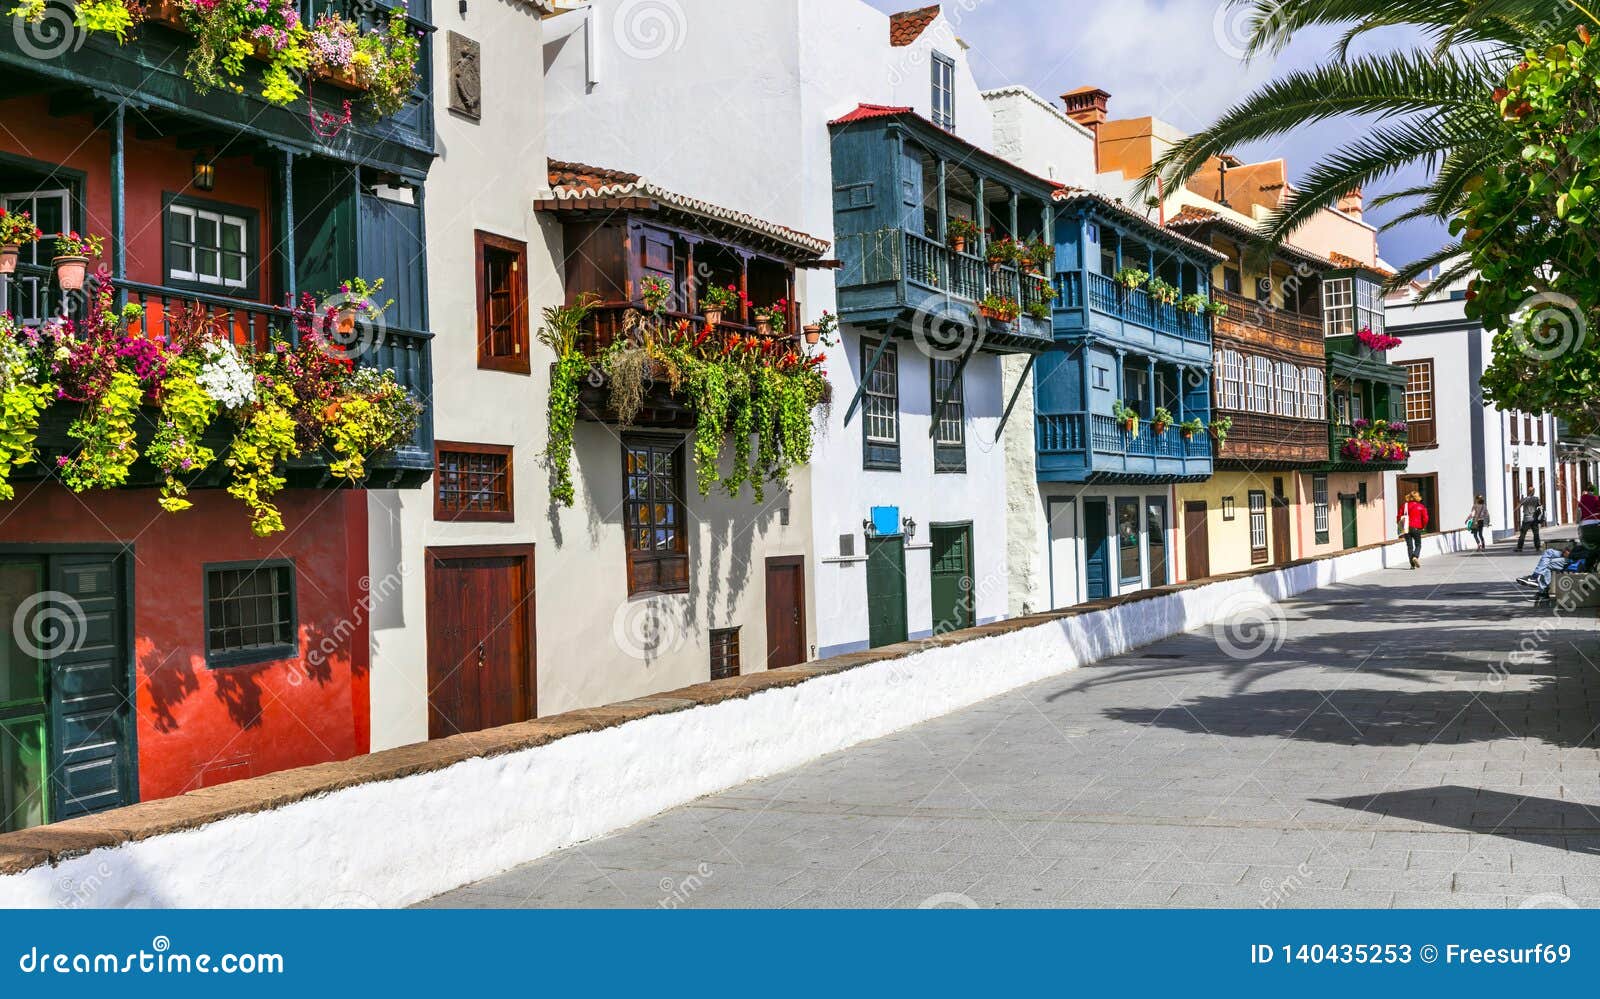 traditional colonial architecture of canary islands . capital of la palma - santa cruz with colorful balconies